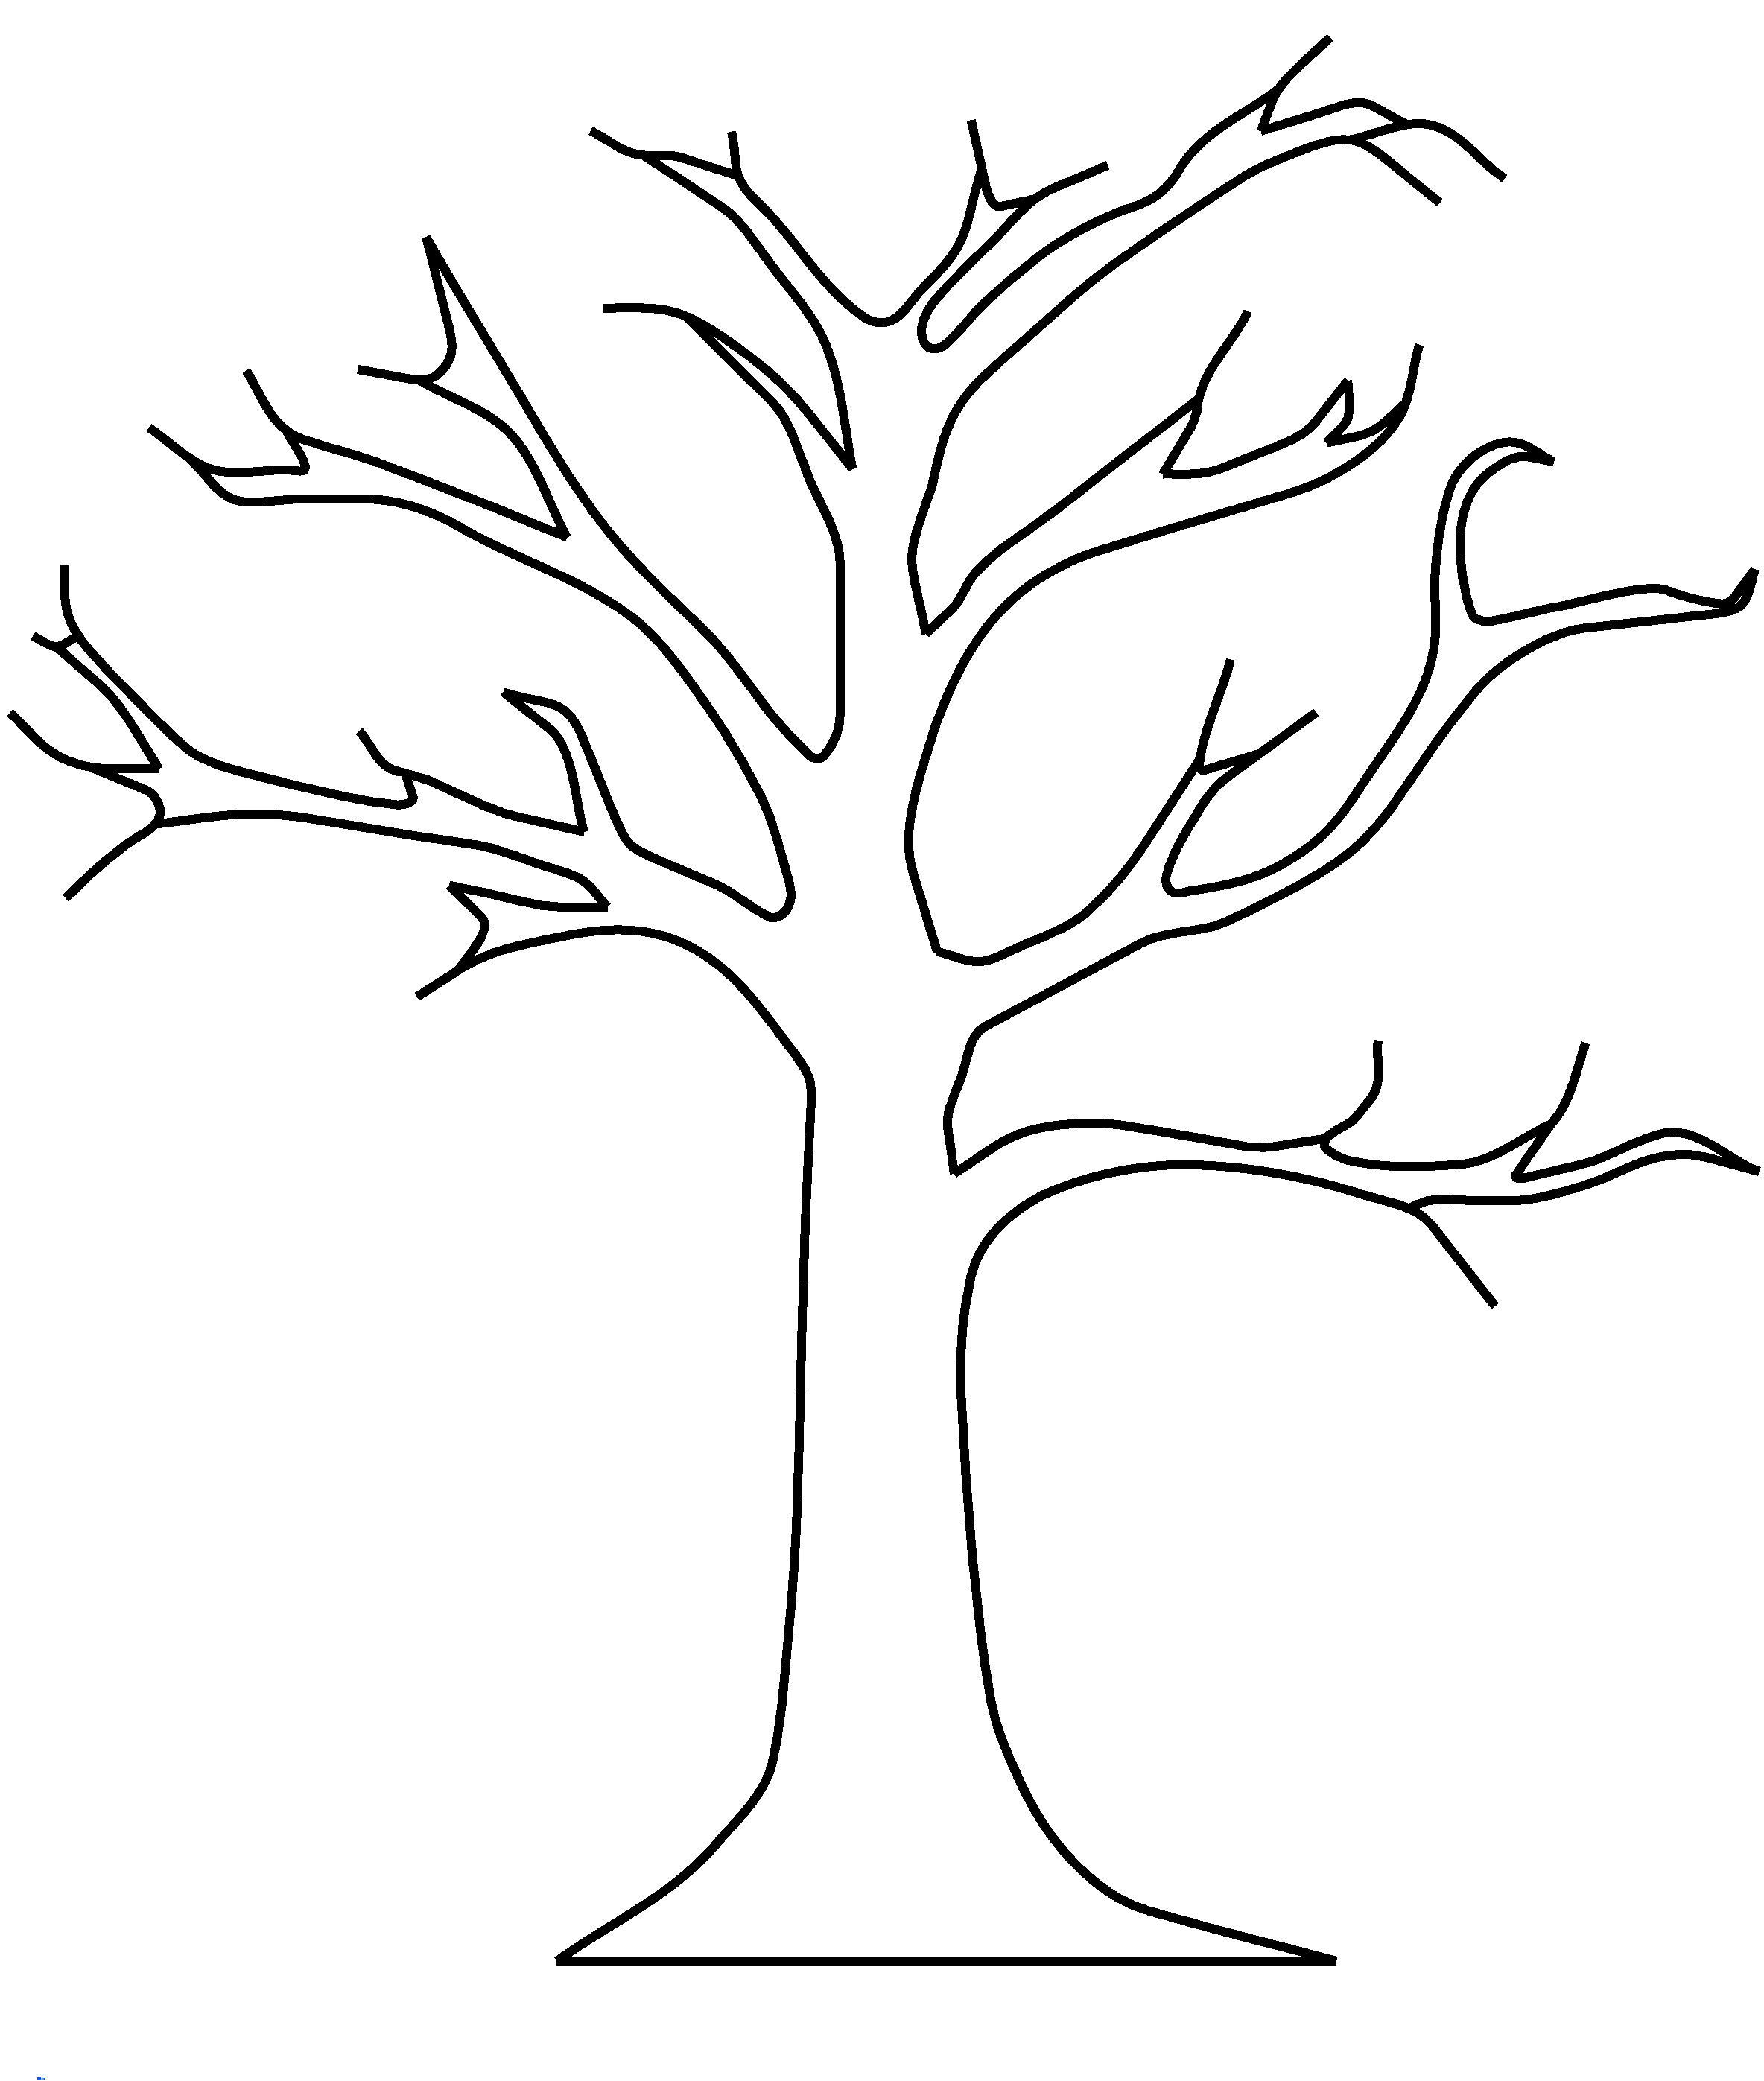 Free Leafless Tree Outline Printable, Download Free Leafless Tree